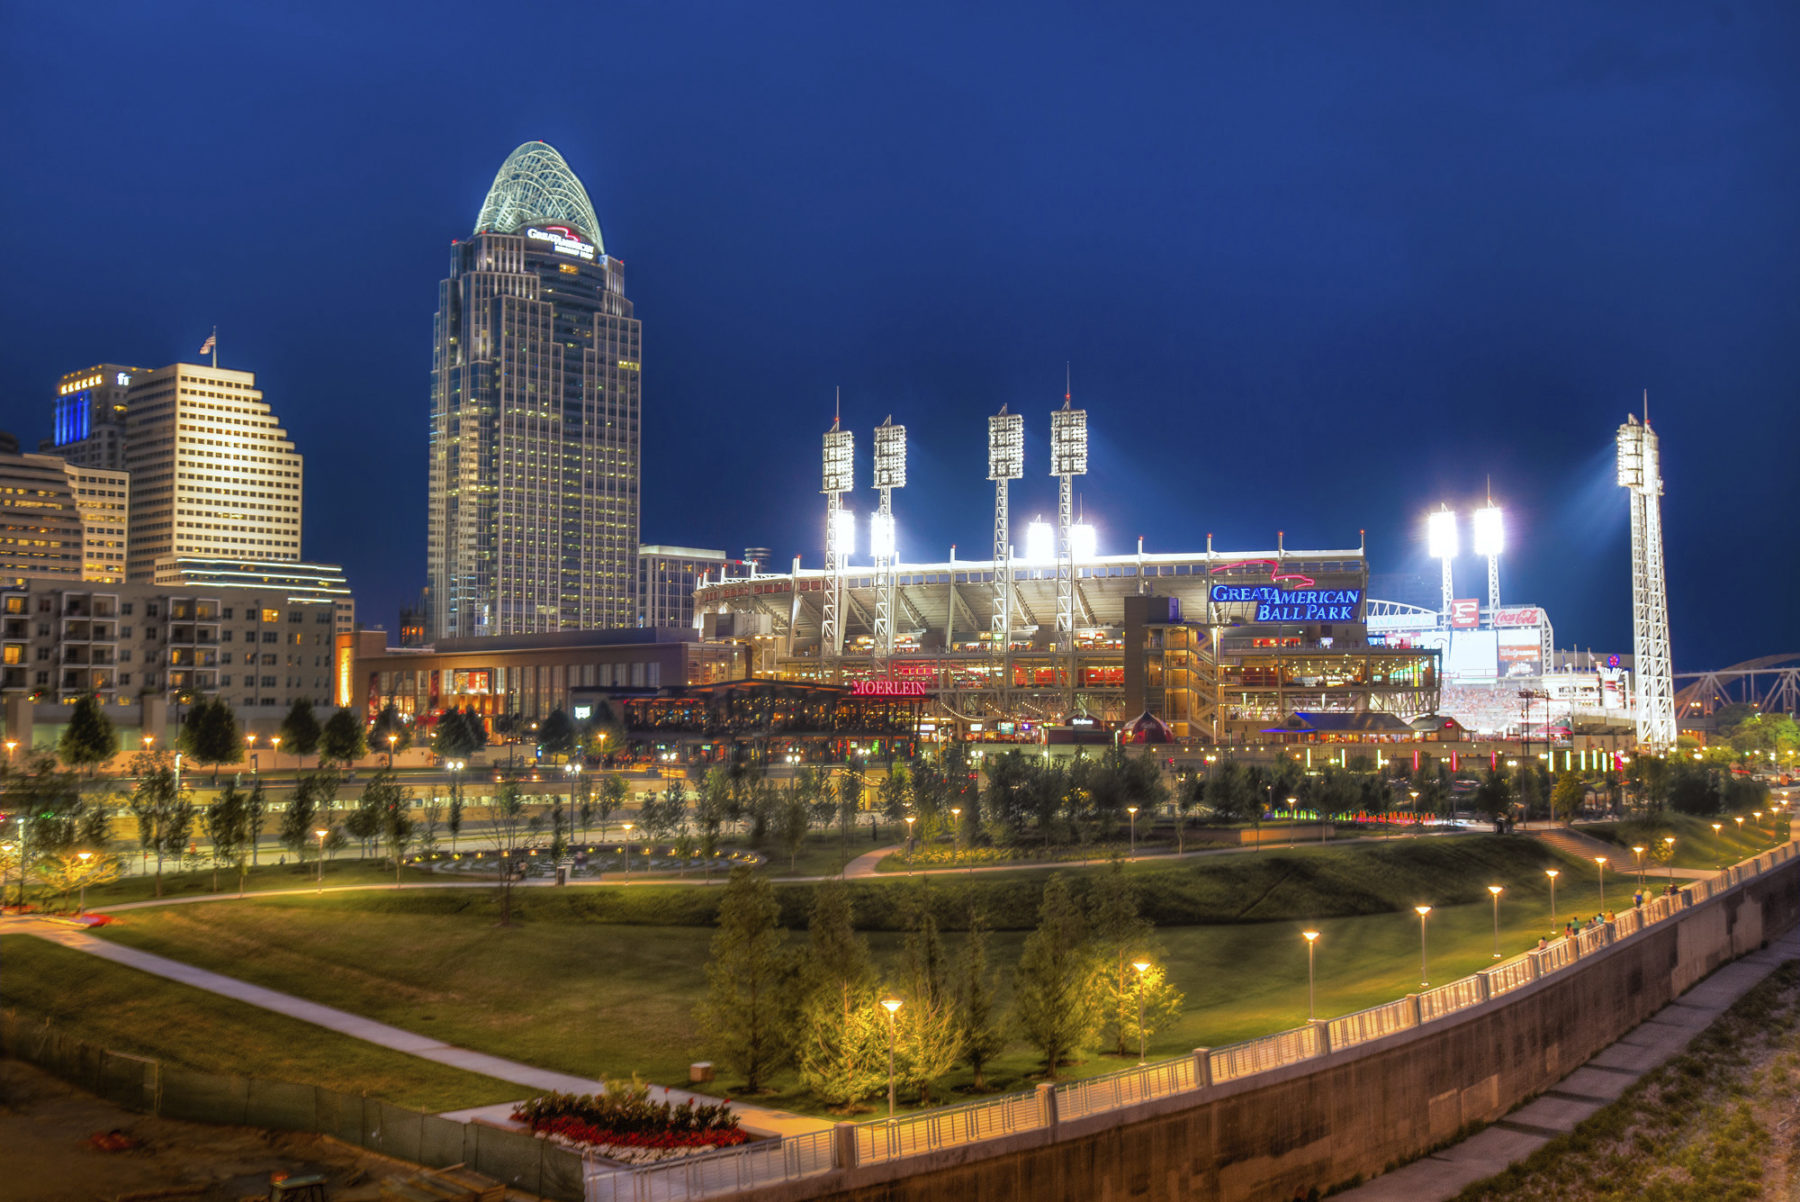 View of the Great American Ball Park at night